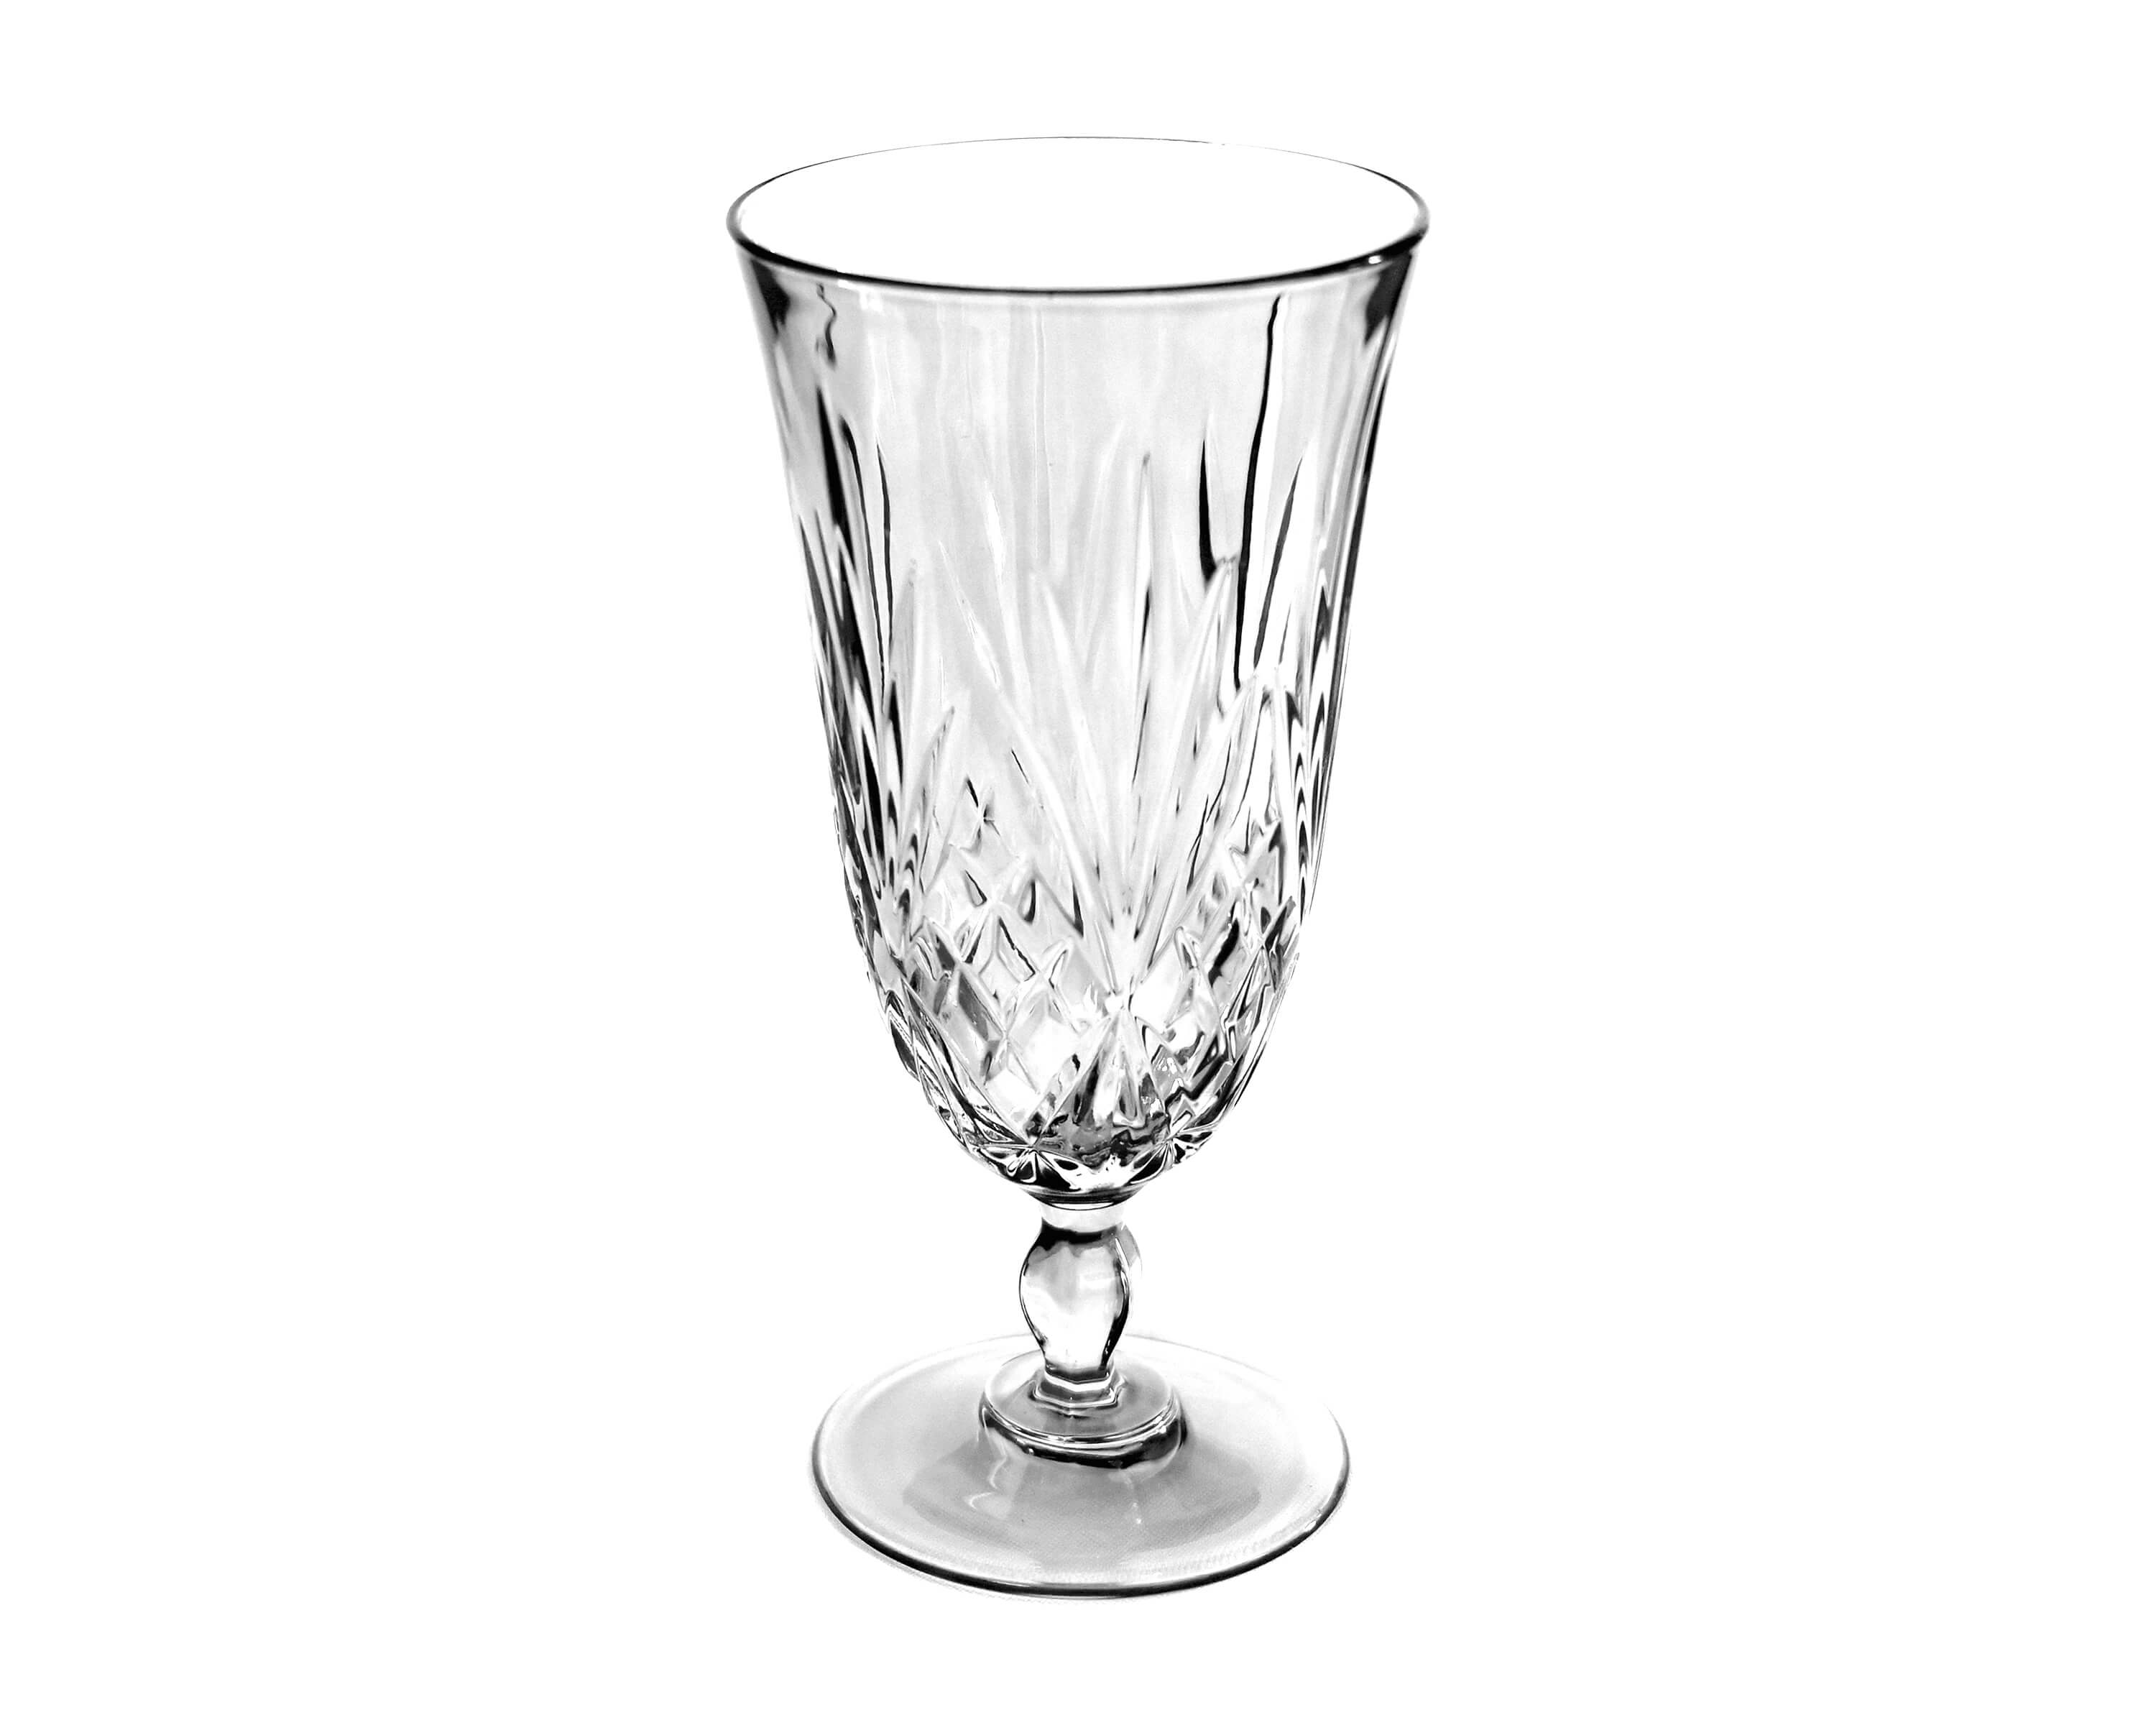 https://www.247-events.com/wp-content/uploads/2021/05/melodia-clear-water-goblet.jpg